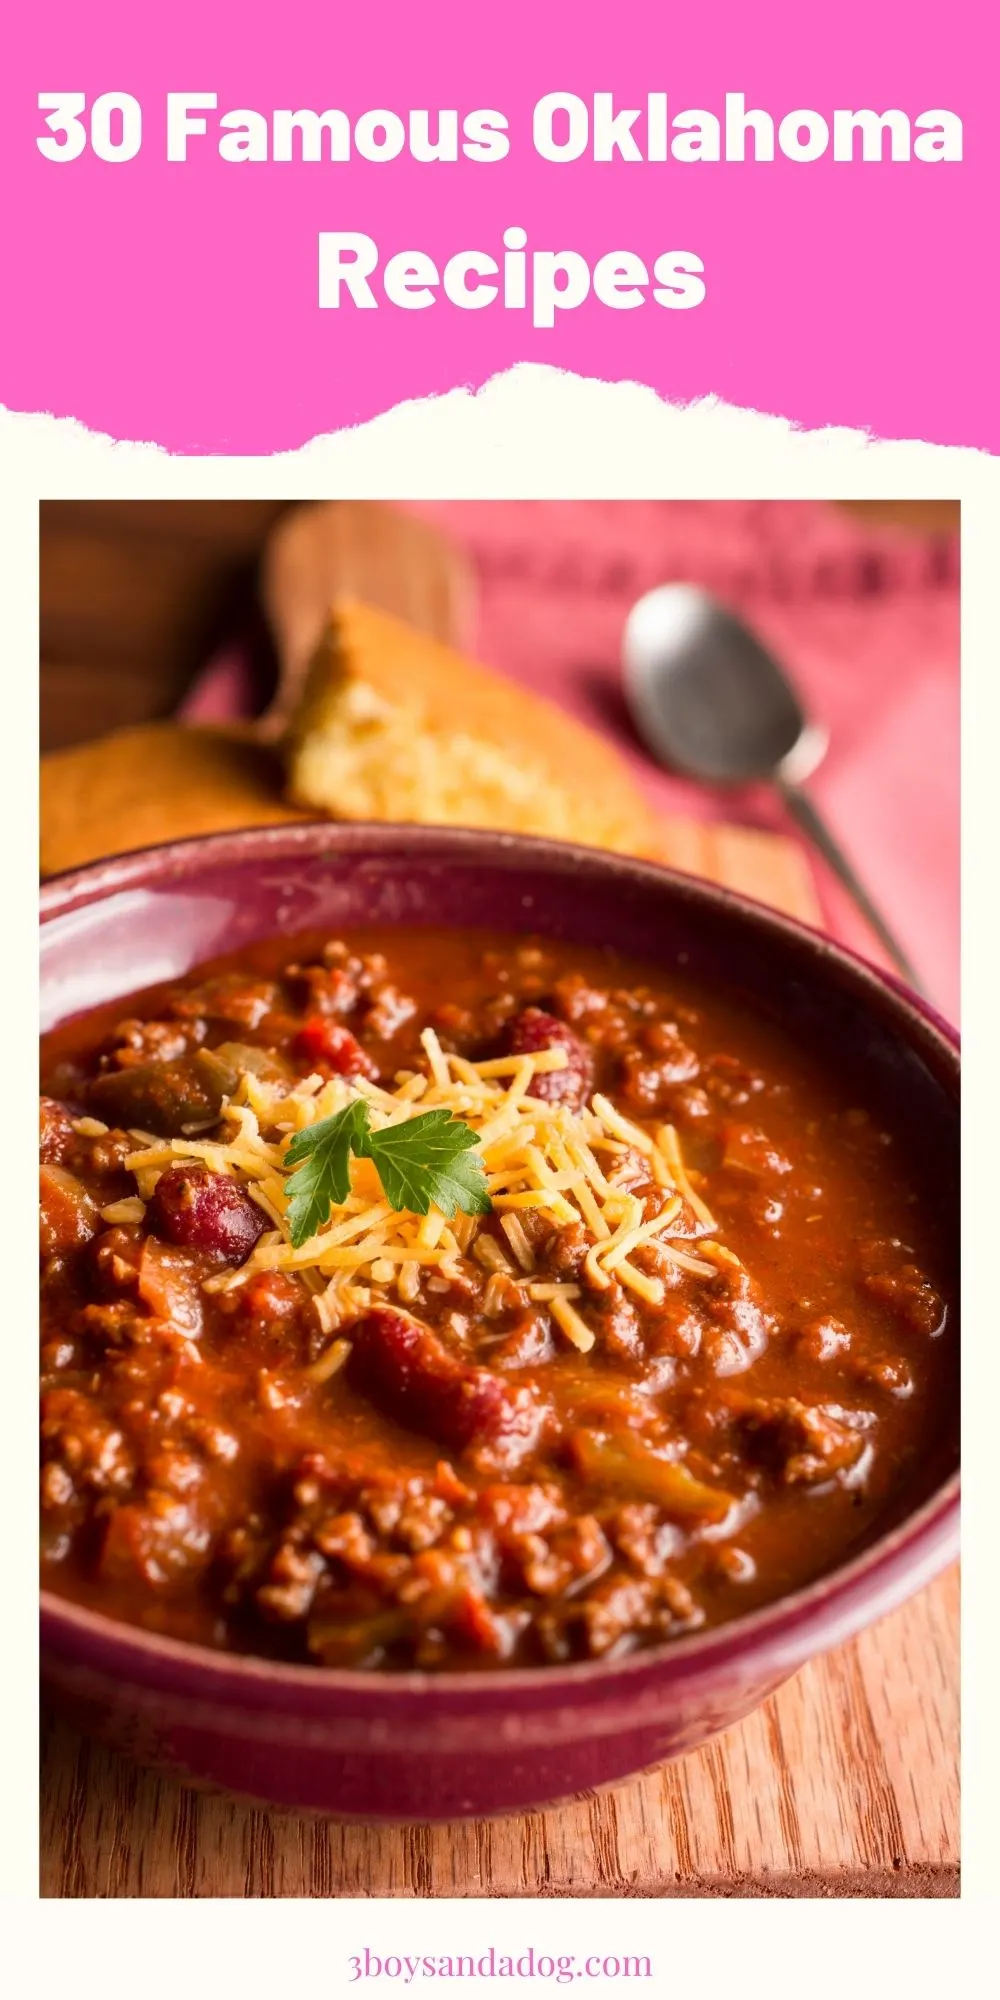 extra pin of famous Oklahoma recipes with an image of chili in a bowl